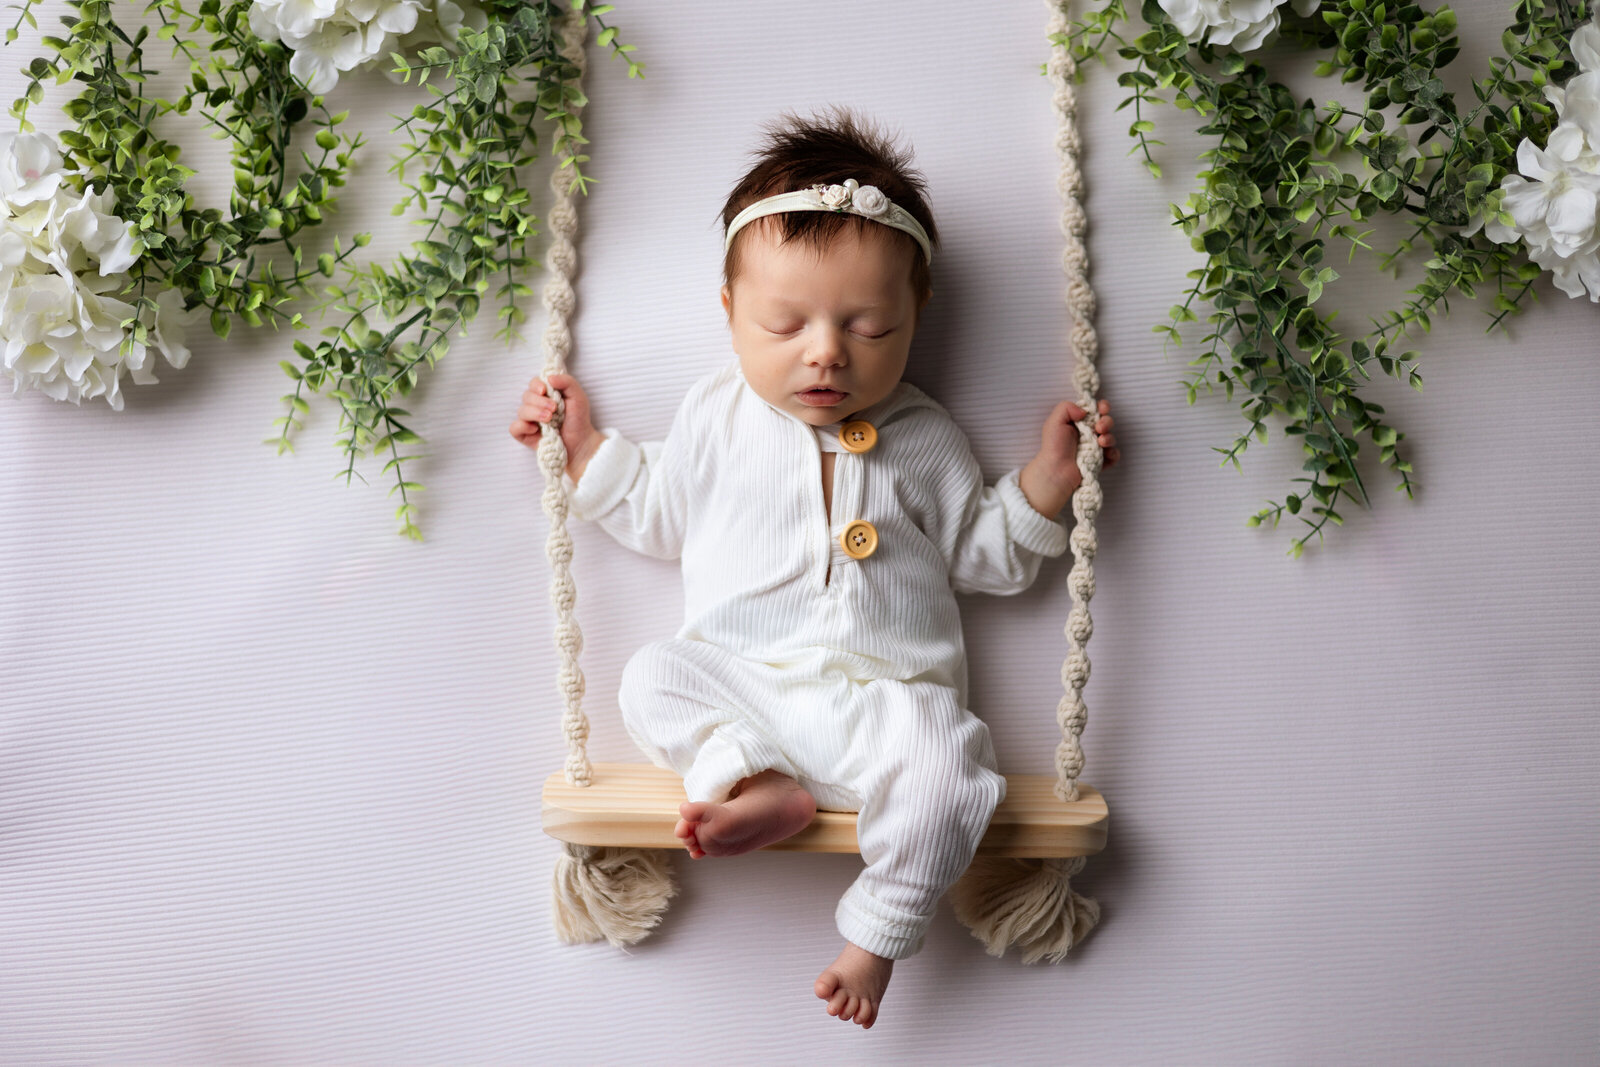 Newborn baby girl dressed in a white outfit posed on a macramé wooden swing